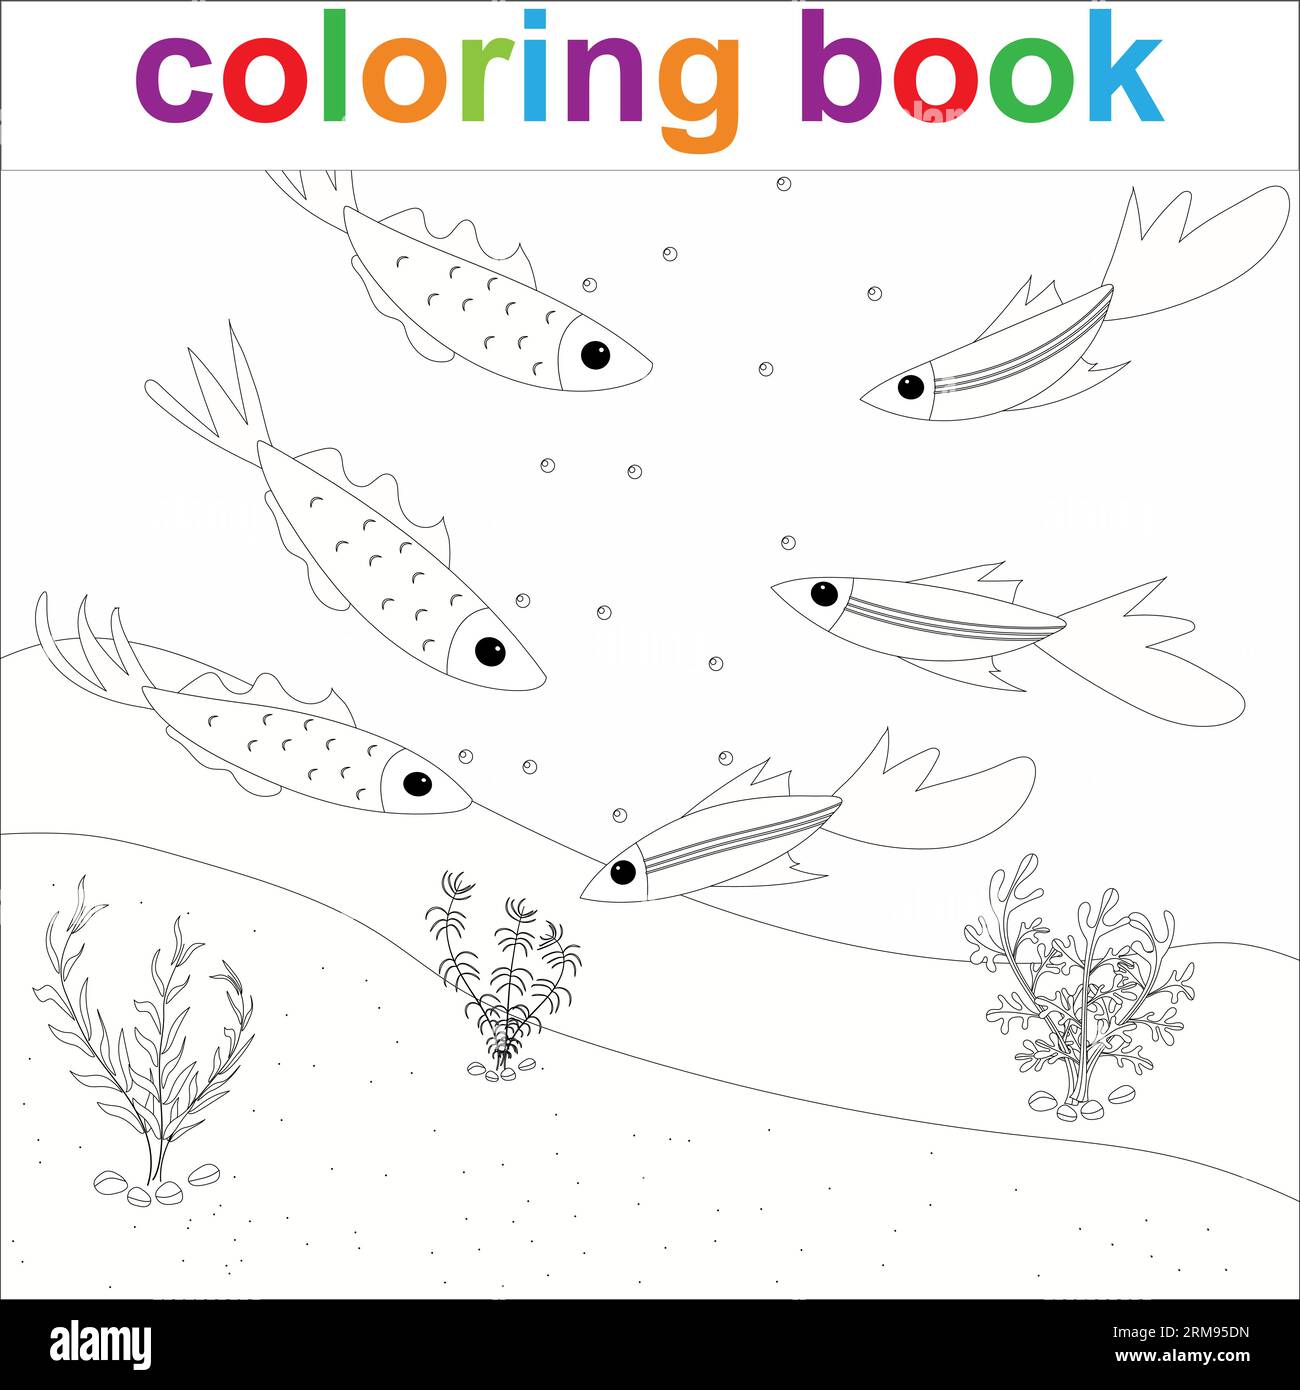 Cute fish coloring page. Kawaii flounder character design. Simple  underwater scene colouring book for kids play and education activity. Easy  print on paper. Stock Vector